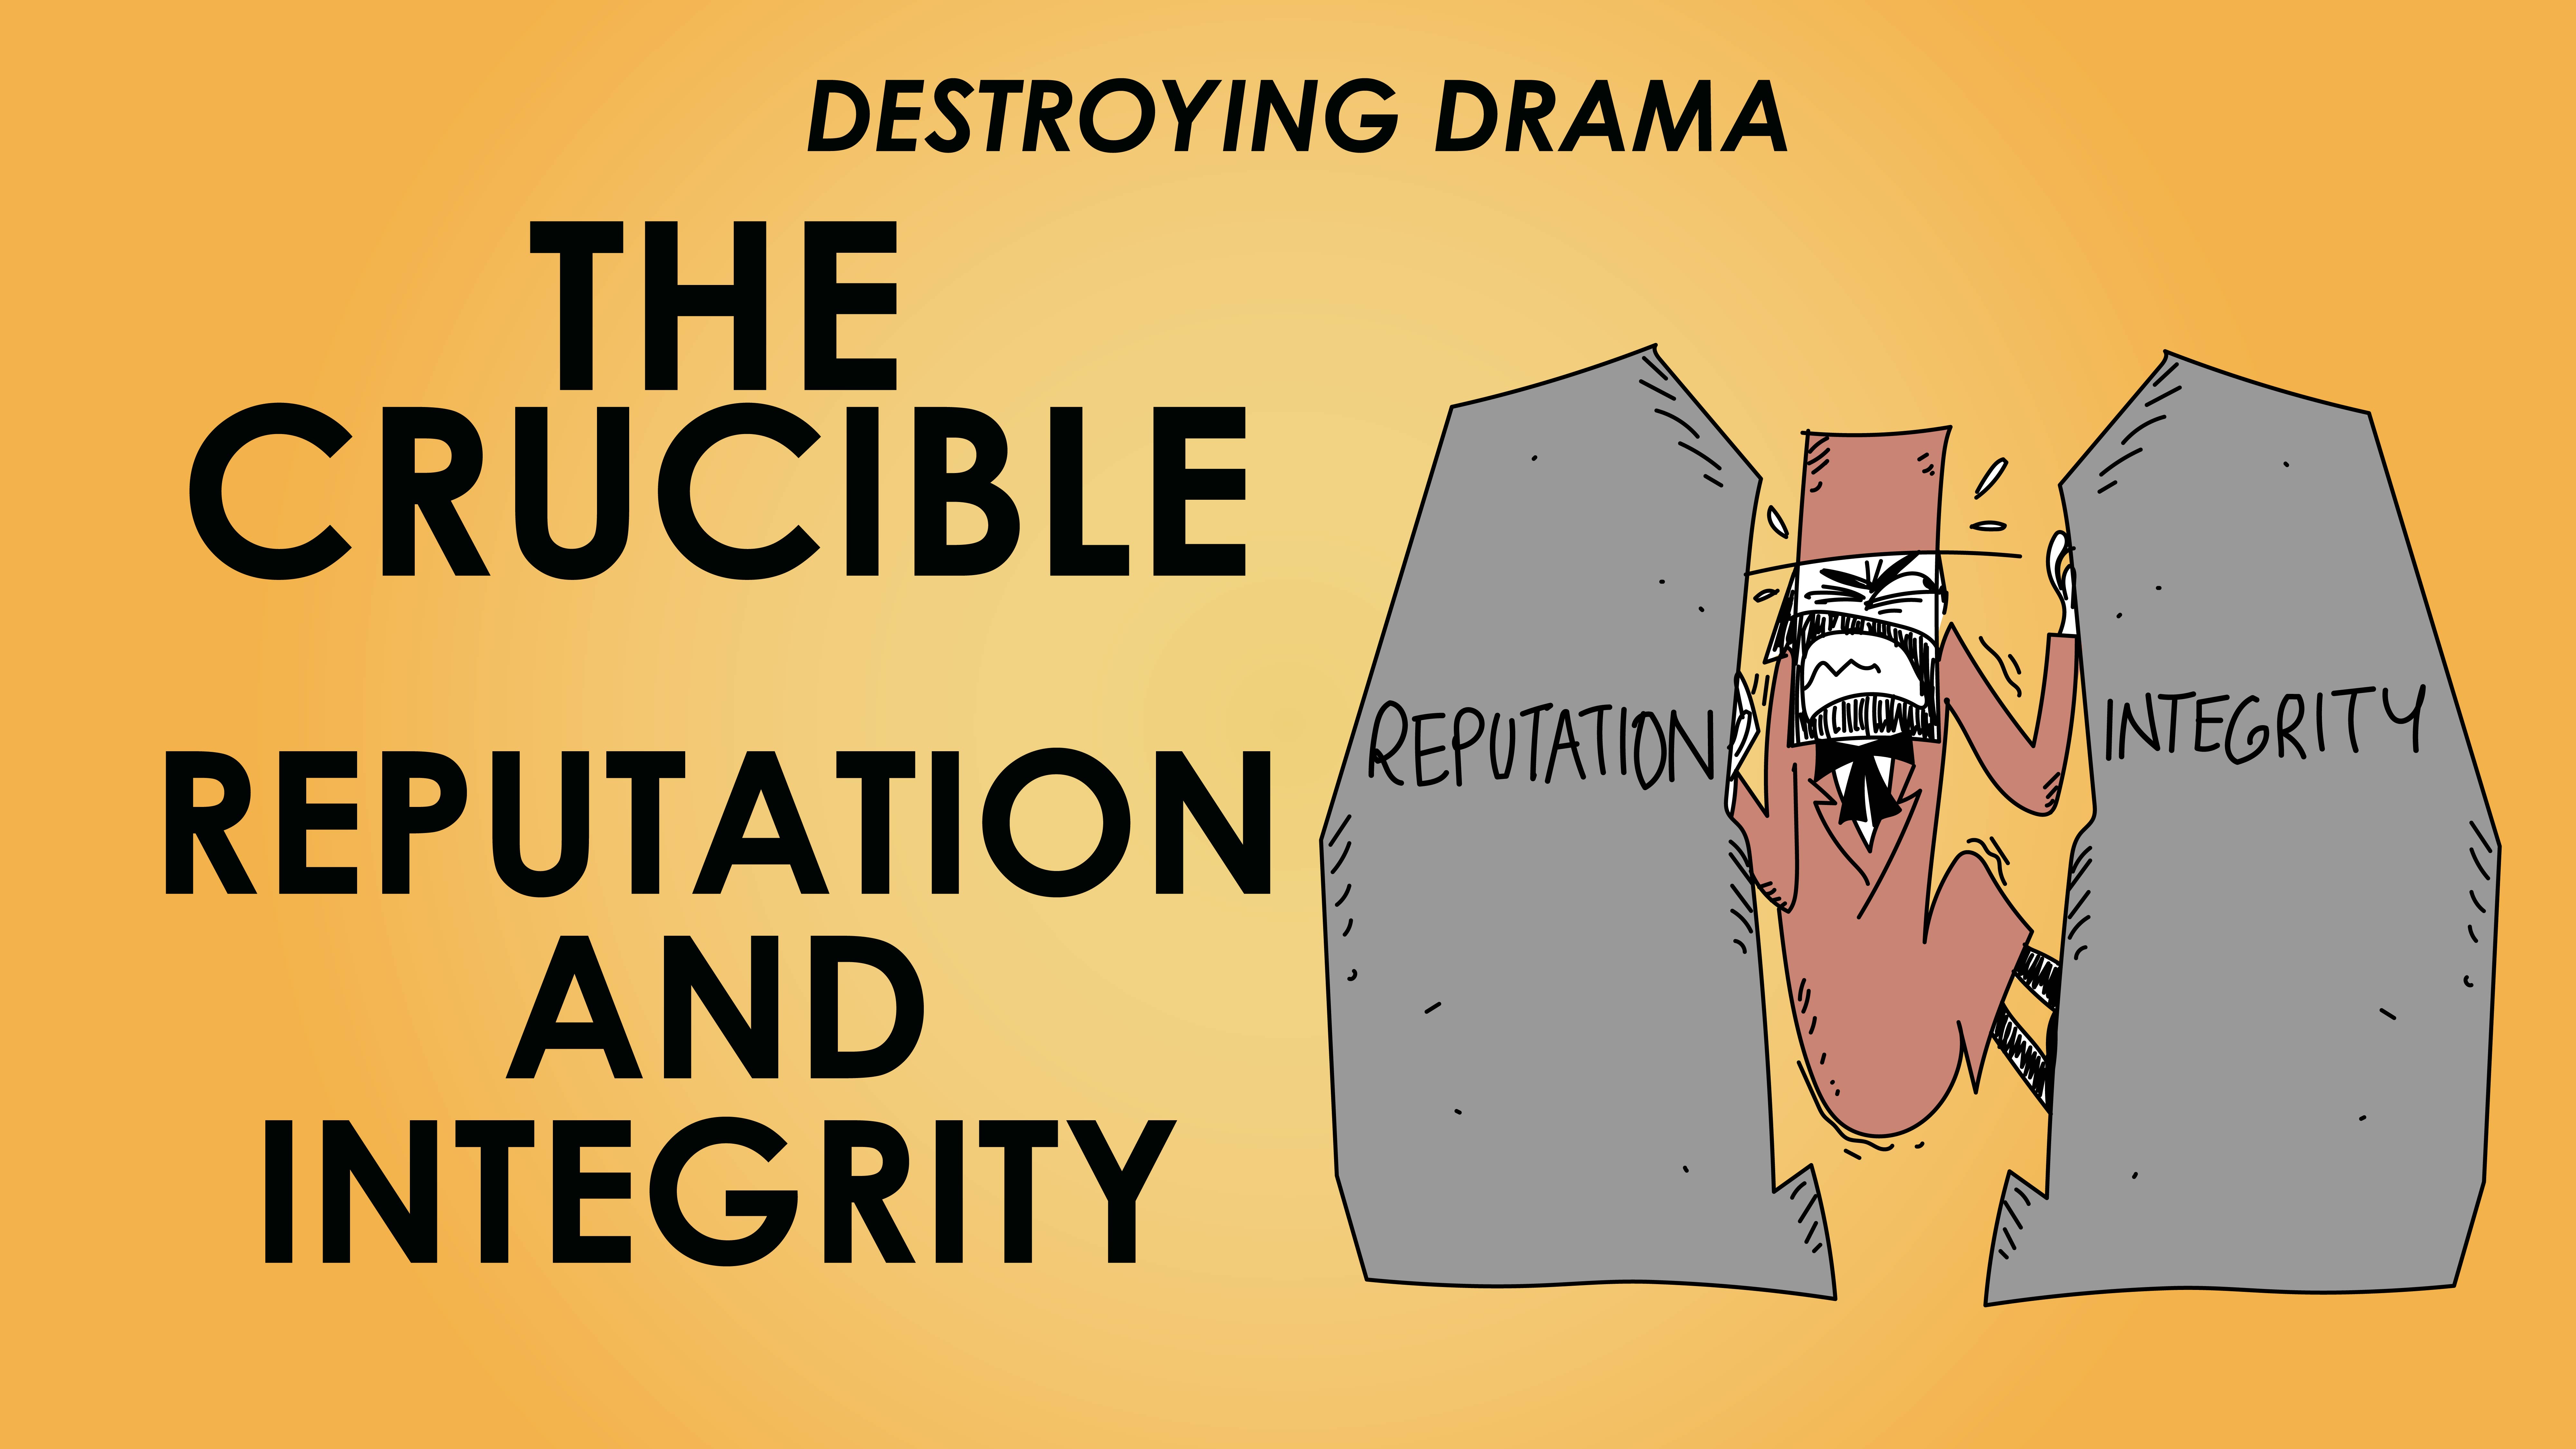 The Crucible - Arthur Miller - Theme of Reputation and Integrity - Destroying Drama Series